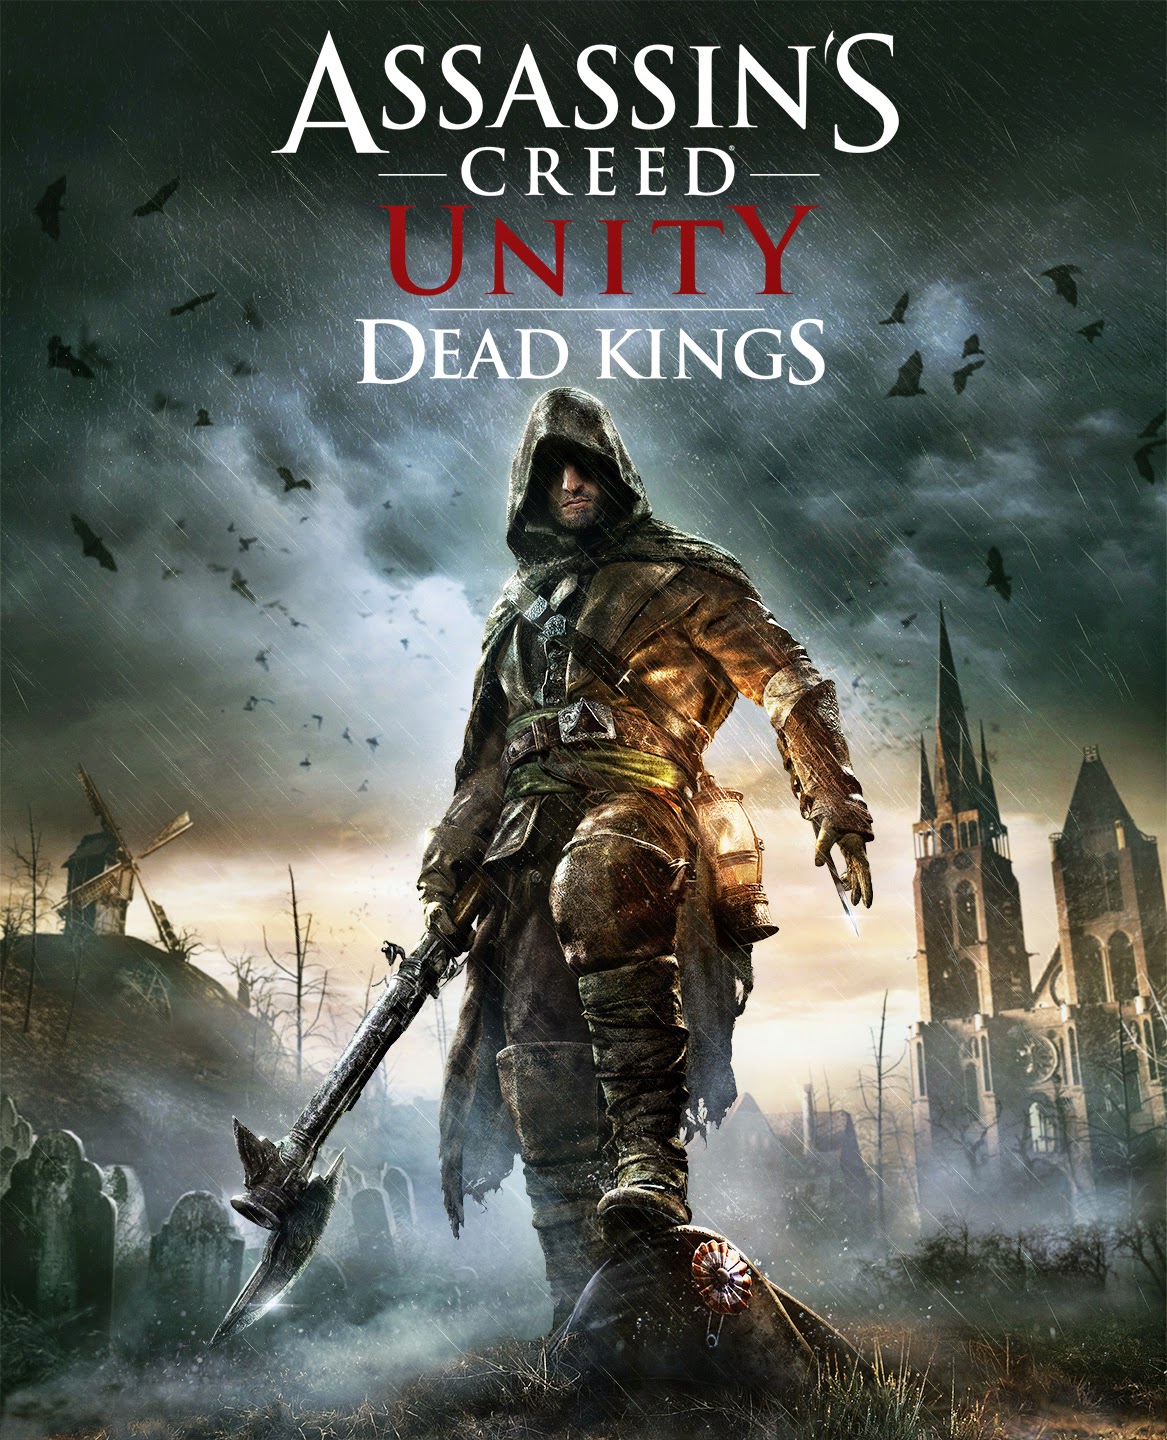 Download Assassins Creed Unity Dead Kings DLC